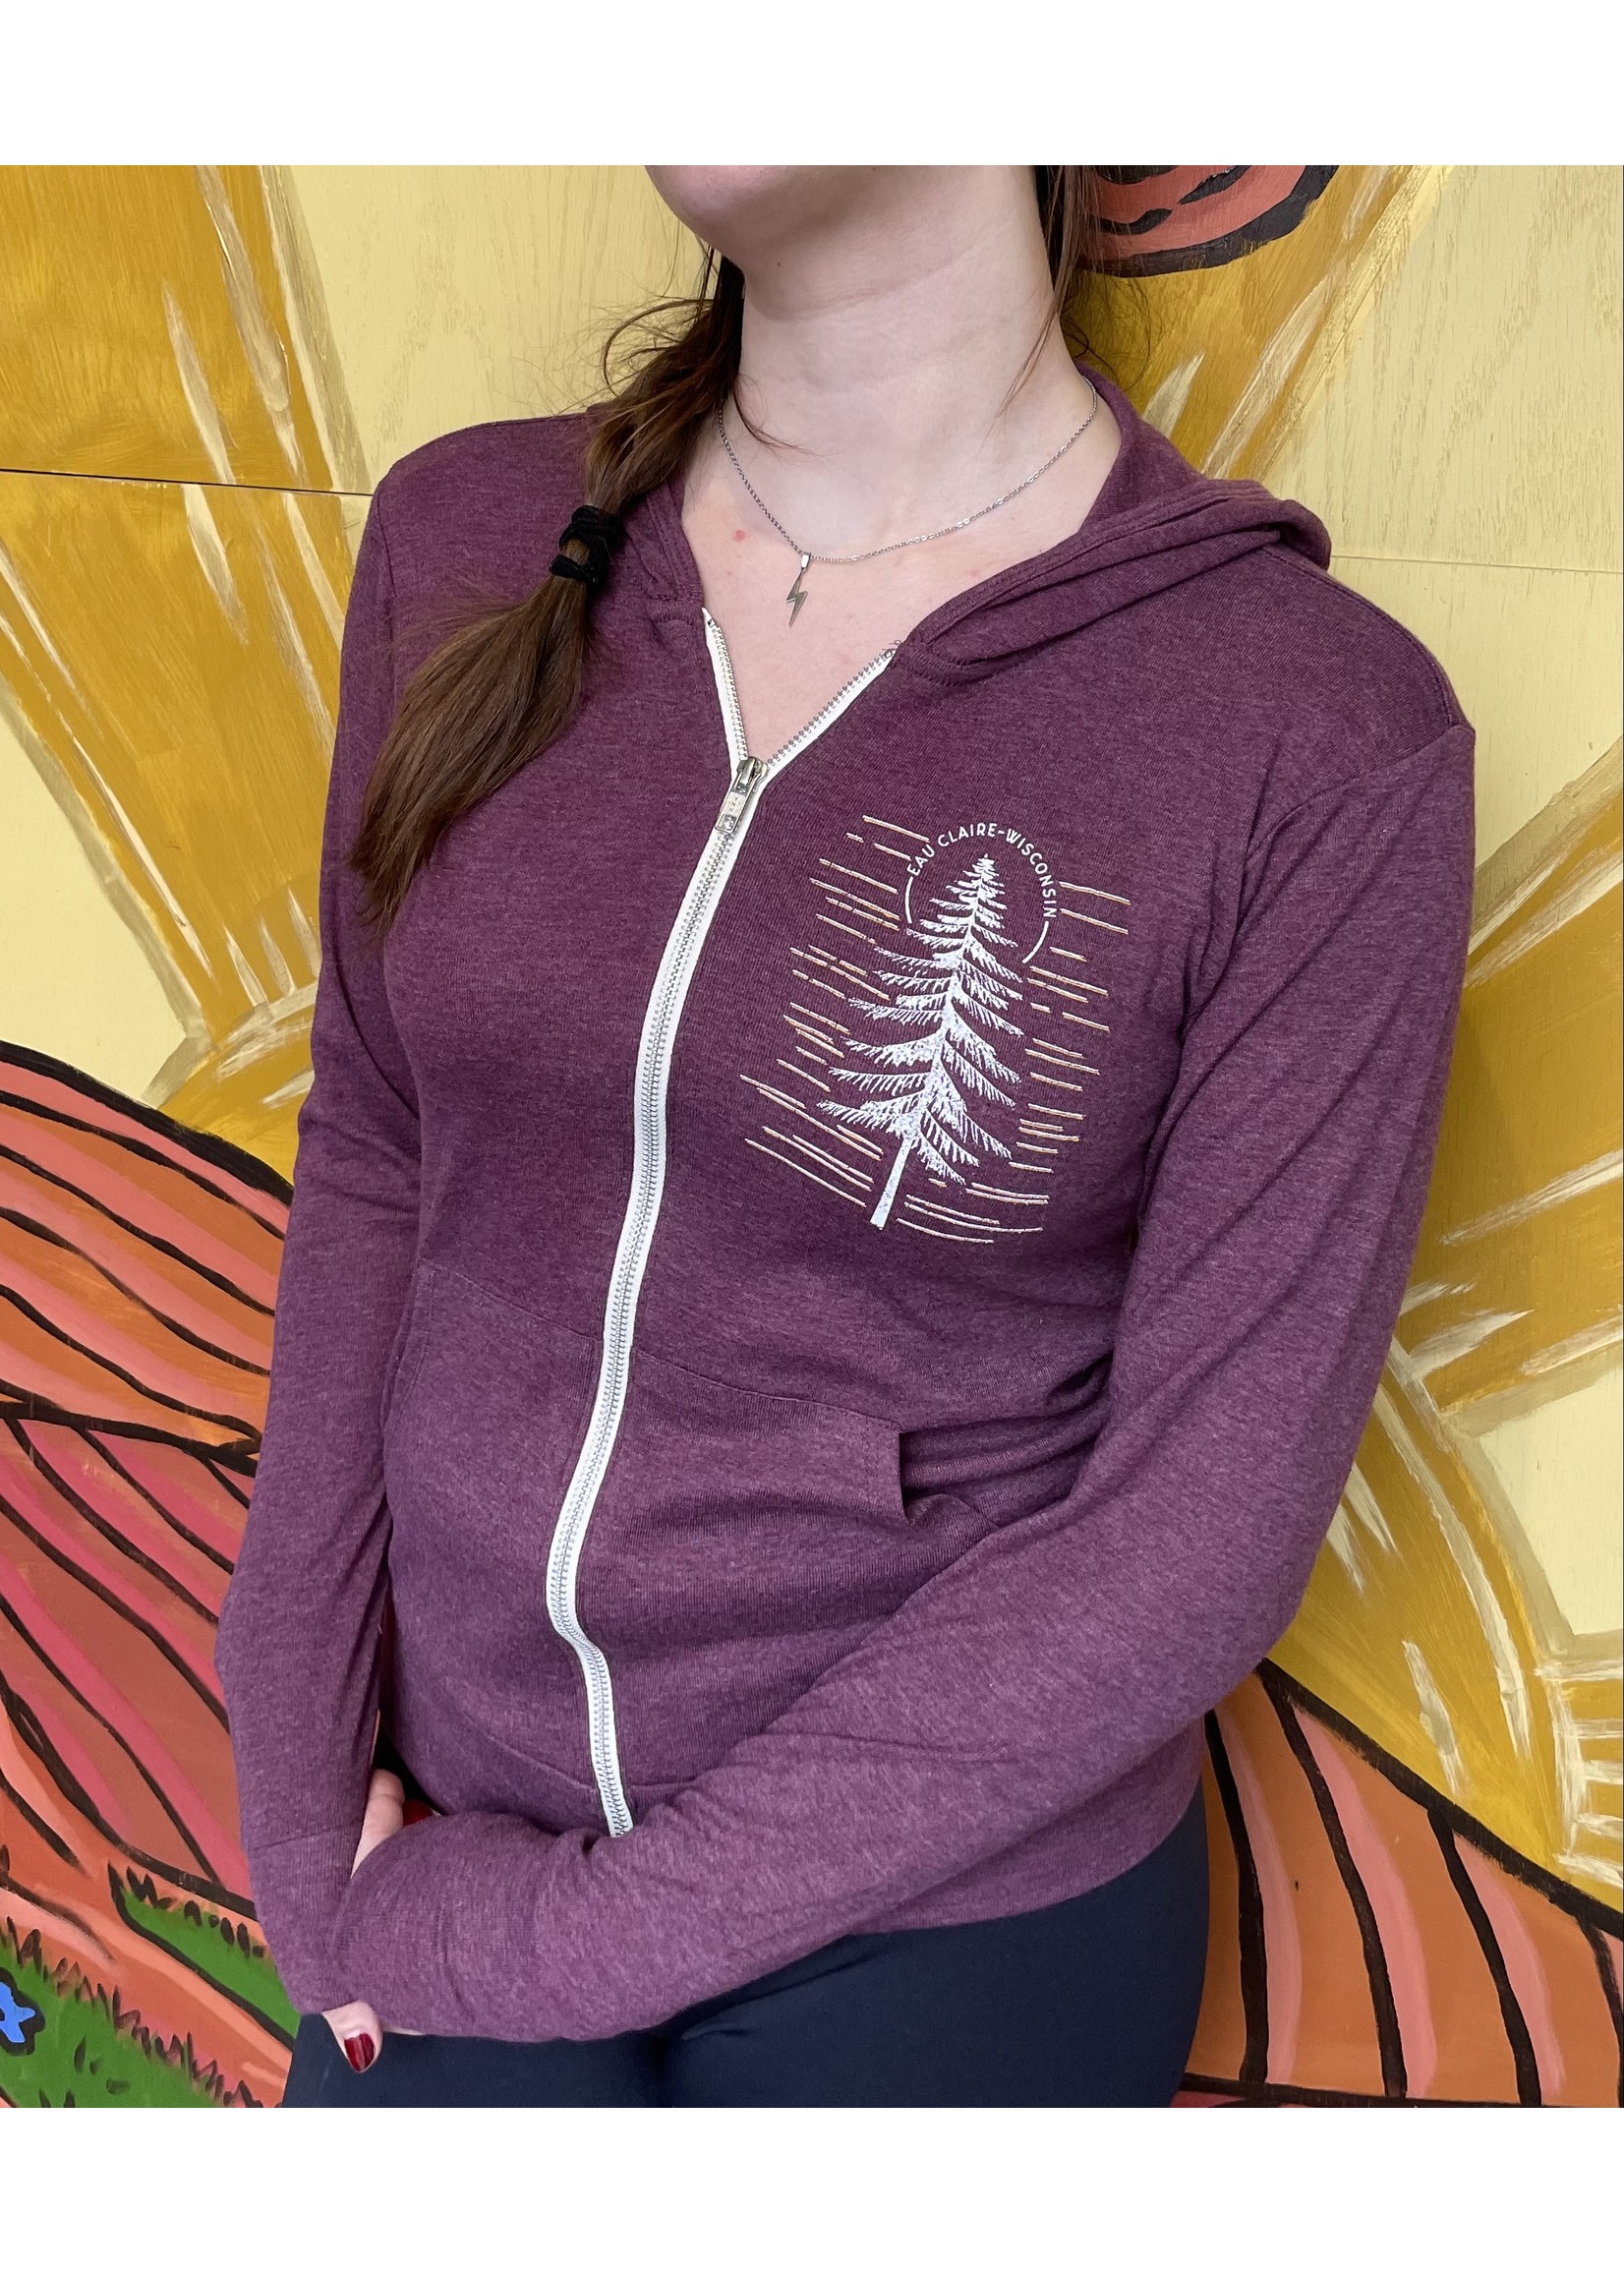 Tangled Up In Hue Eau Claire Pine - Lightweight Sweatshirt